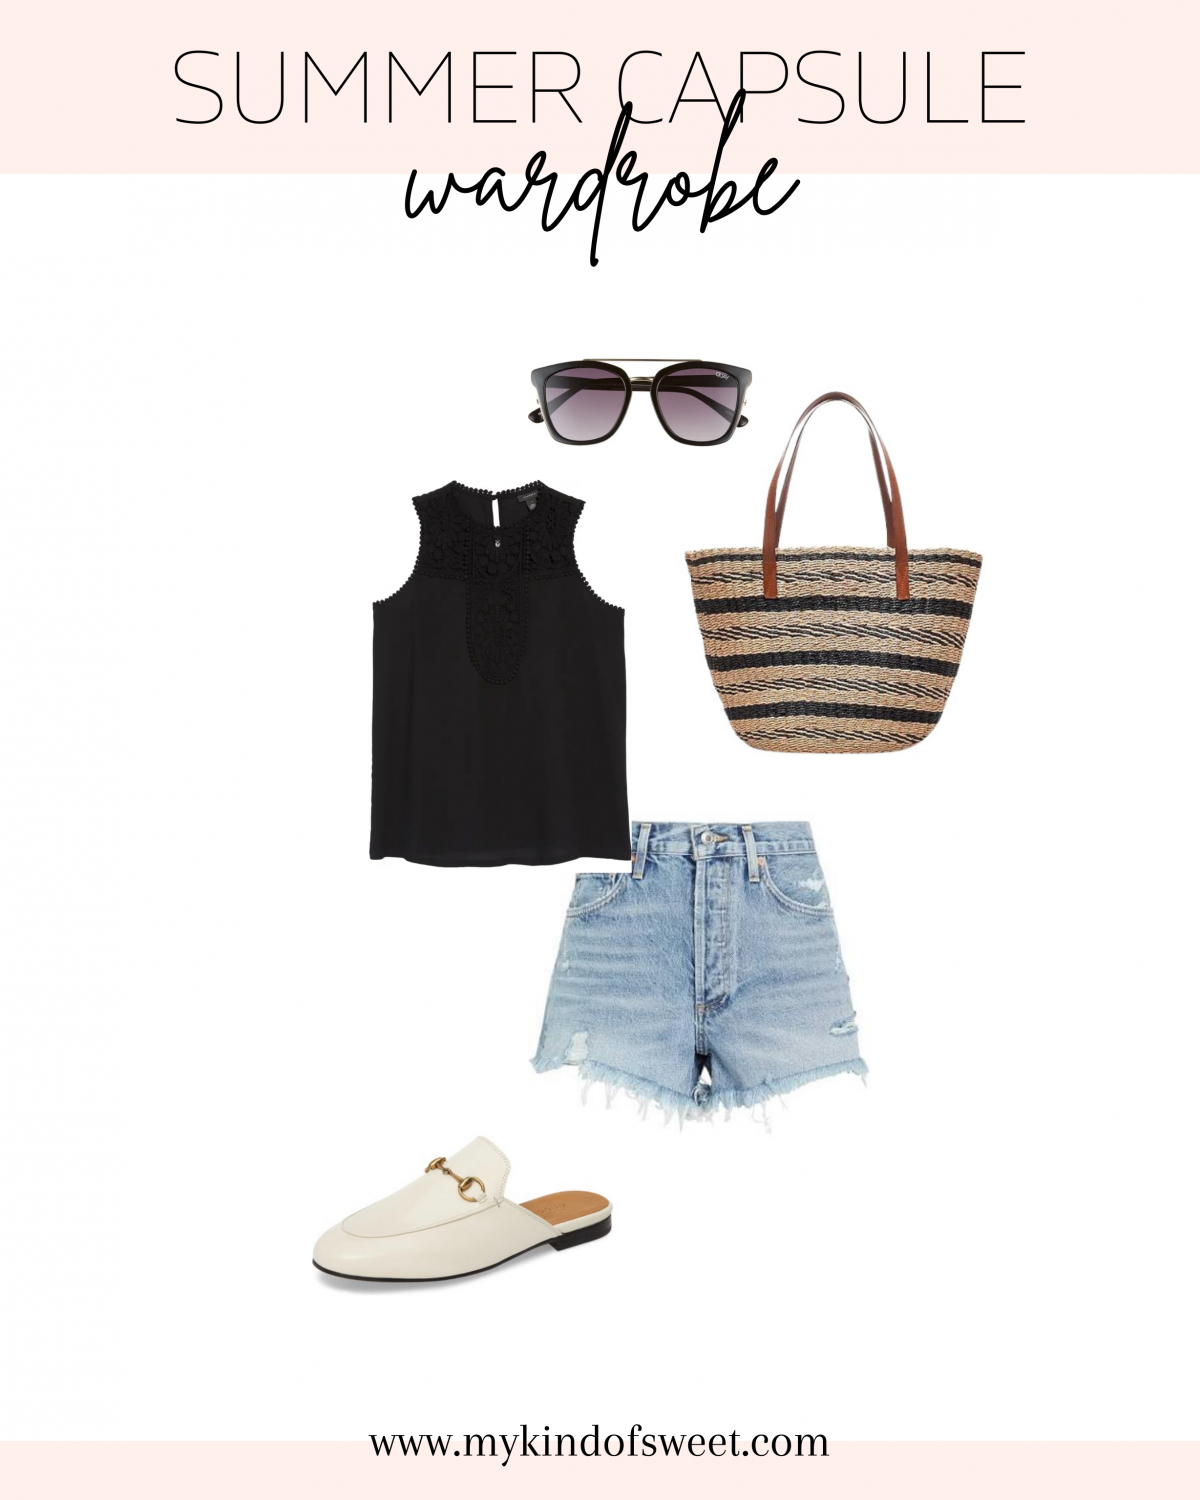 Summer Capsule Wardrobe | 20 Outfit Ideas - my kind of sweet